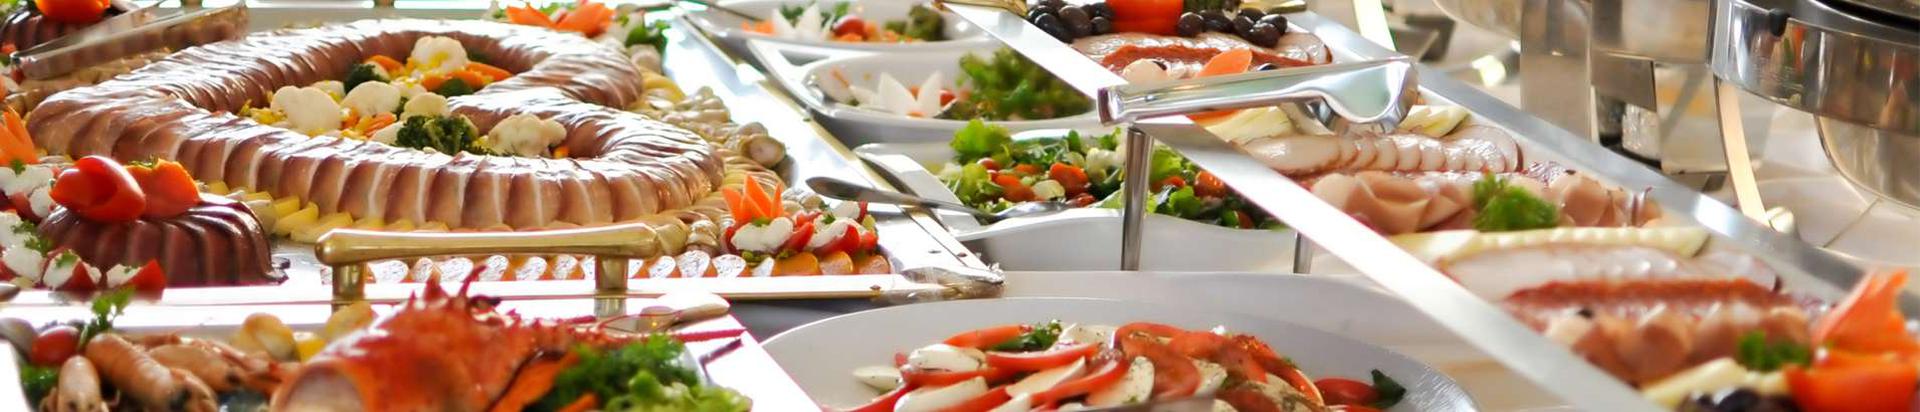 catering services, Trade, recreation and entertainment